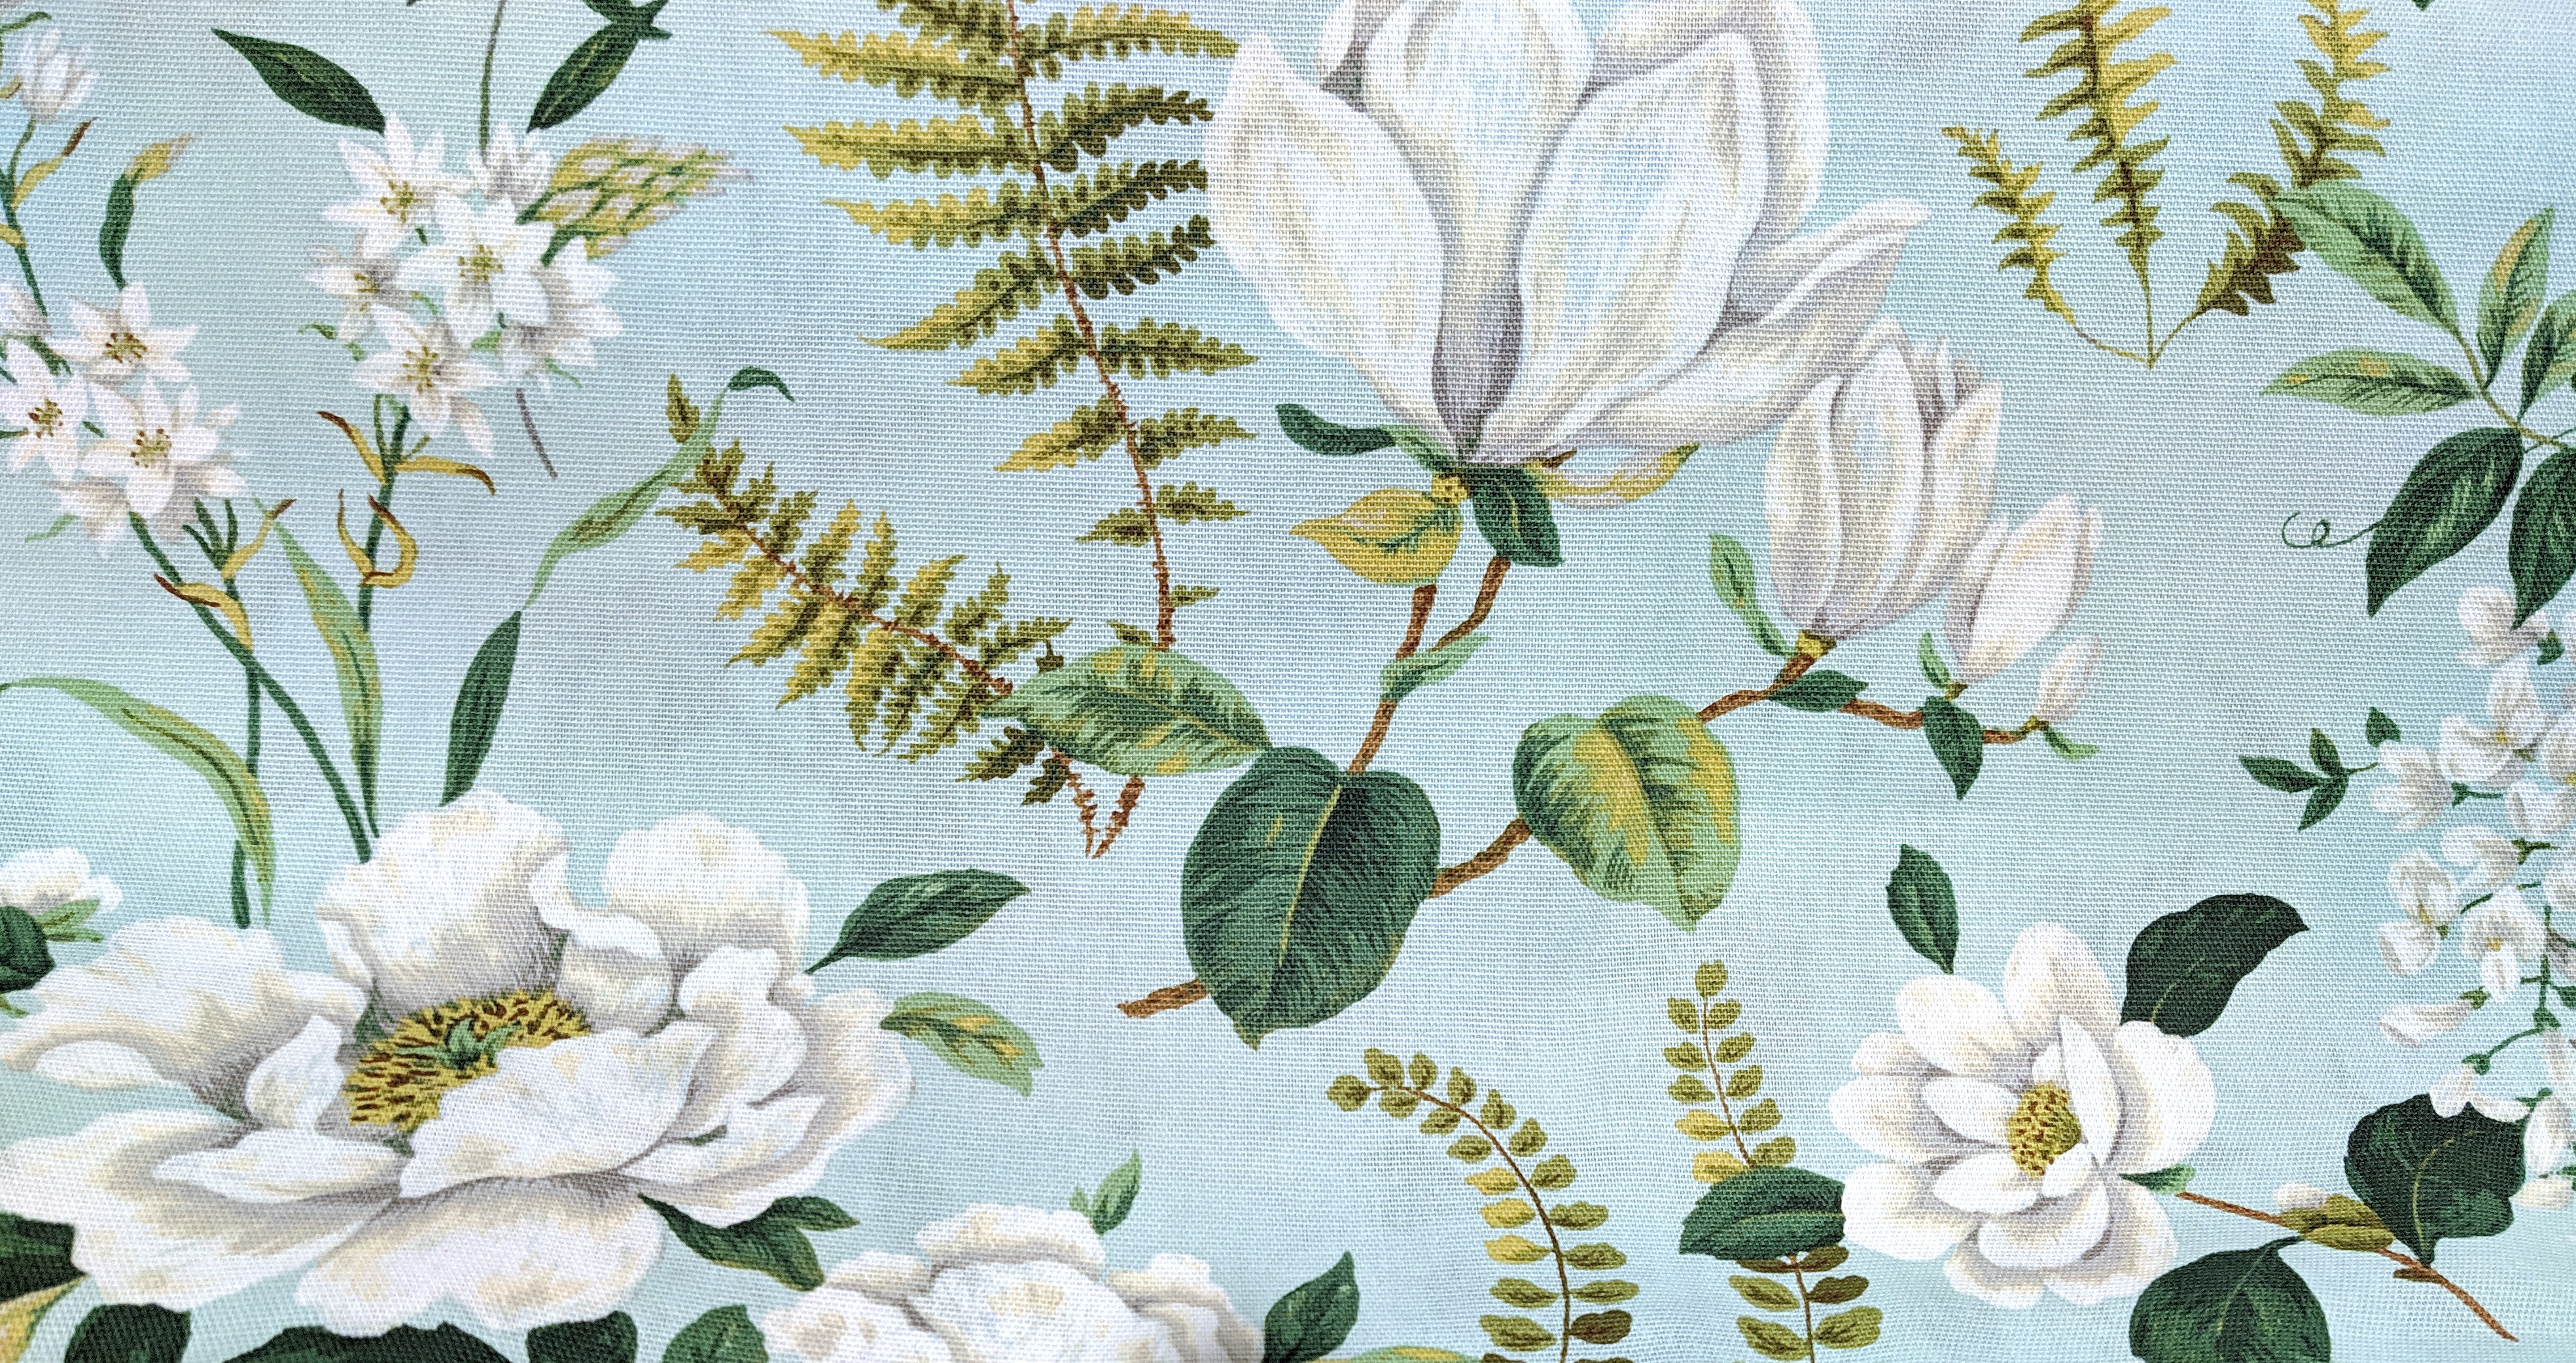 Waverly Inspirations Cotton Duck 45" Jane Mosse Floral Dew Color Sewing Fabric by the Yard - image 1 of 1